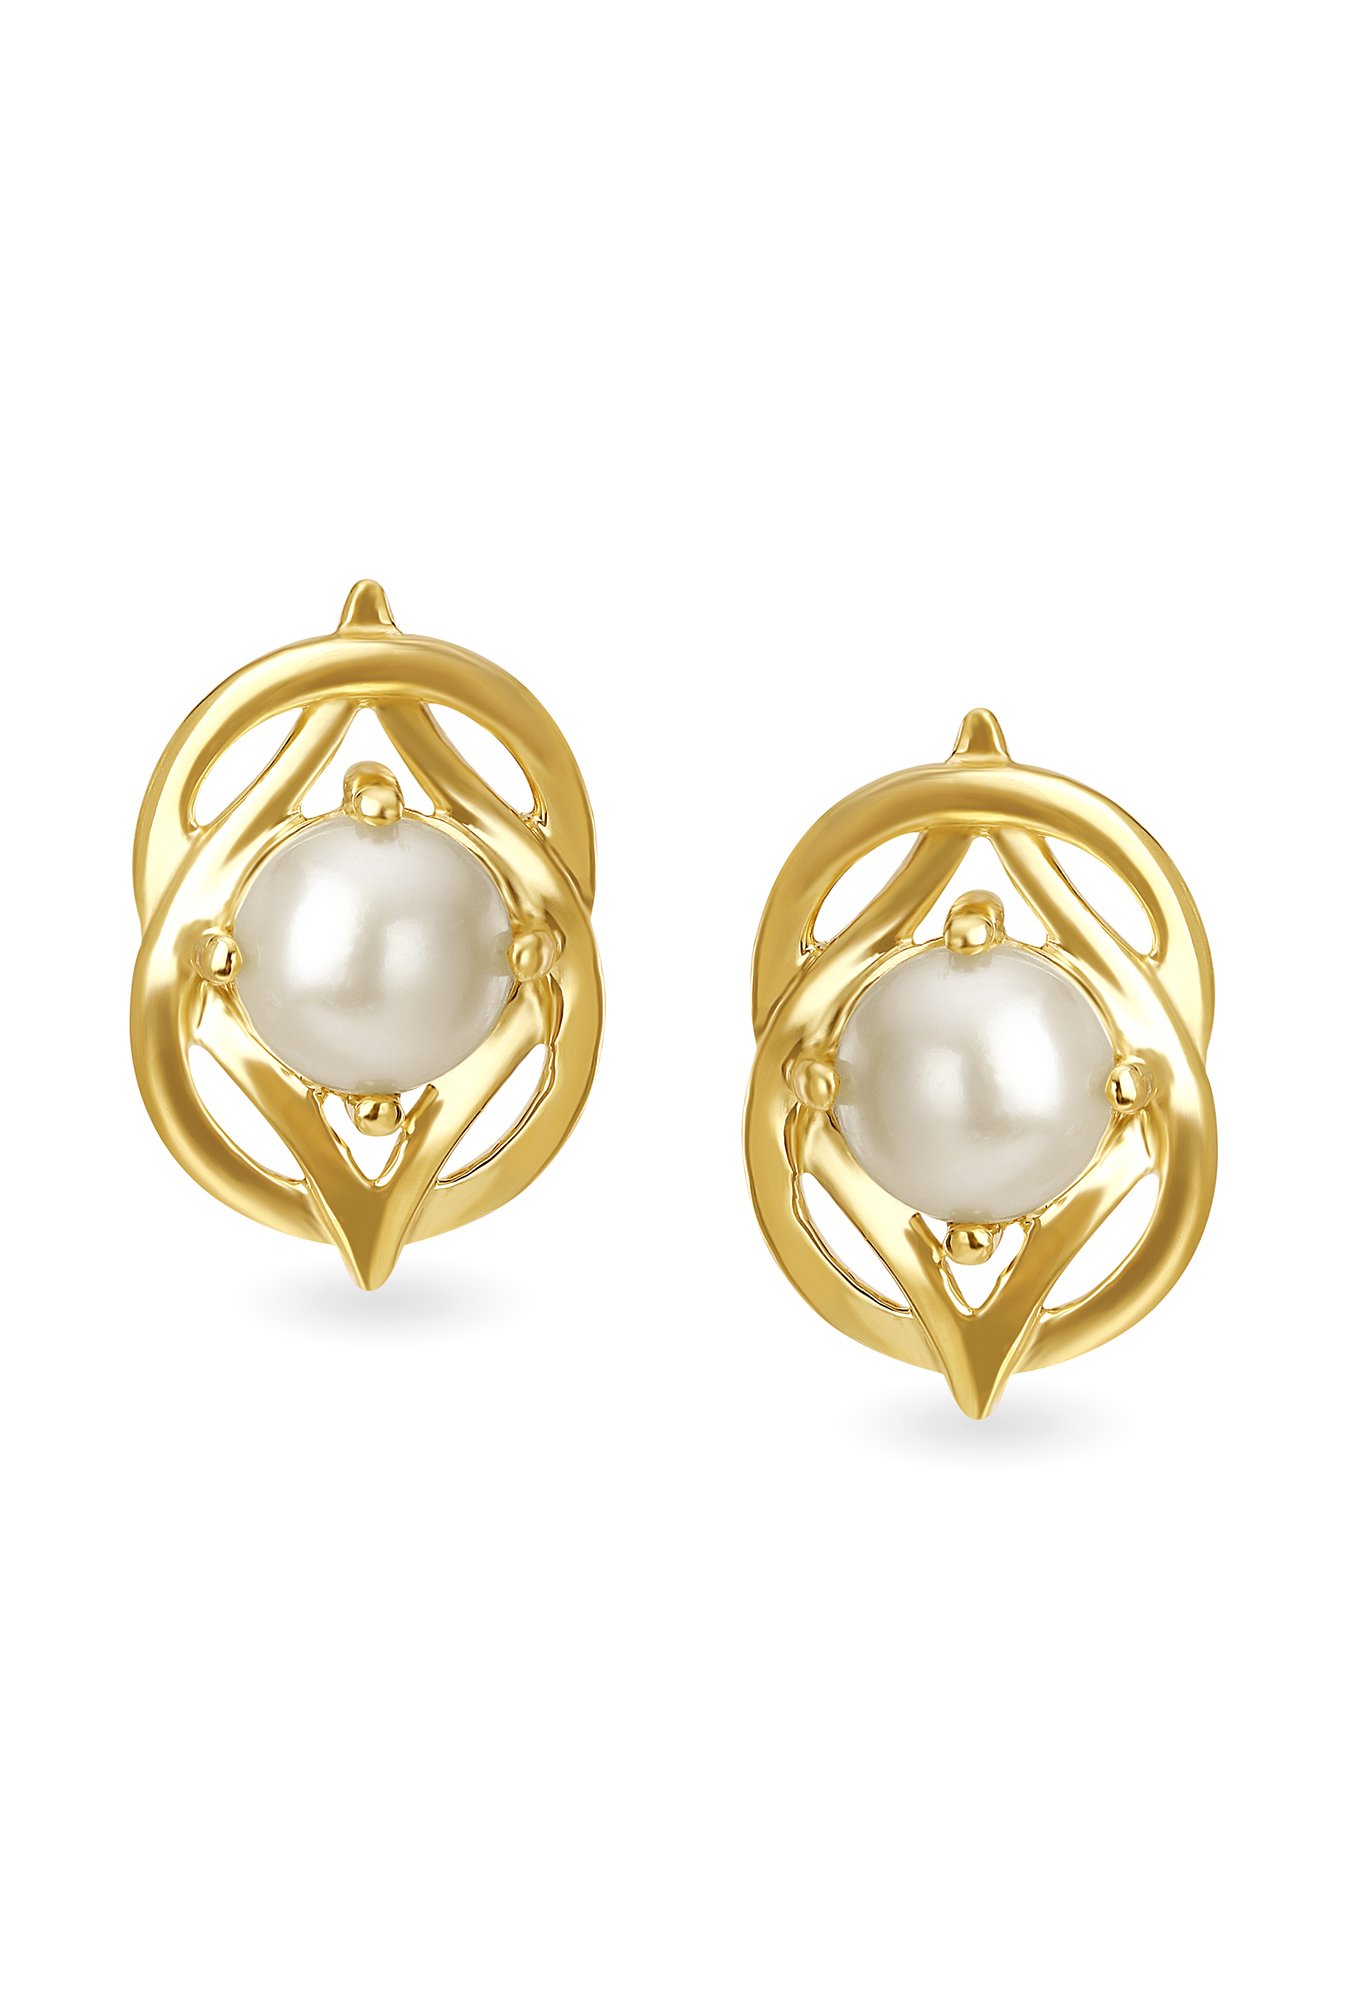 Discover 134+ pearl earrings gold tanishq latest